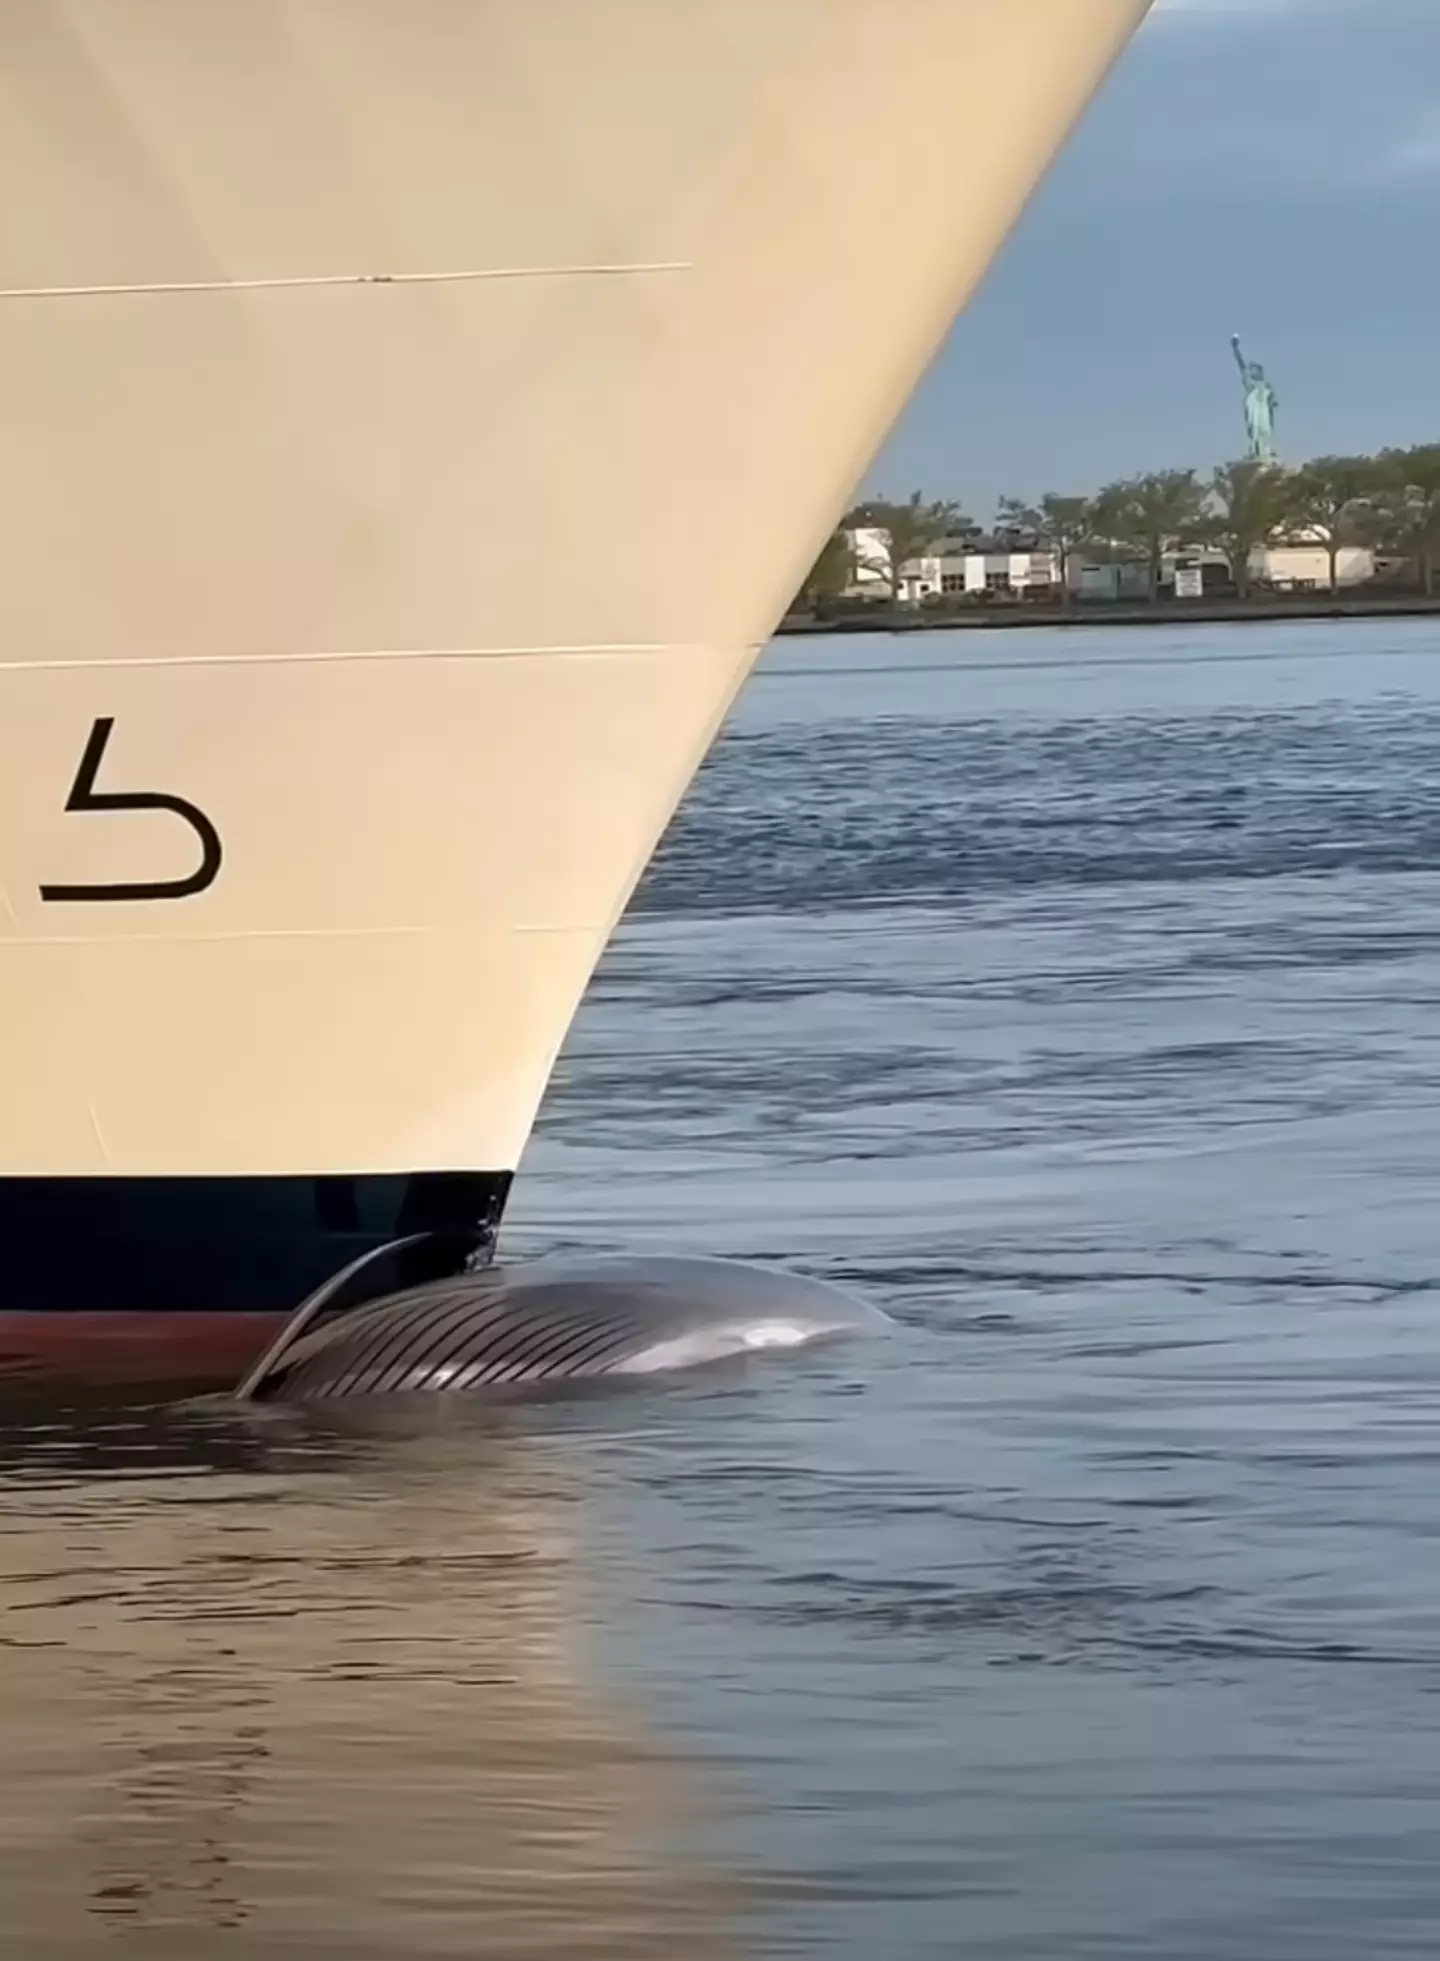 The whale on the bow of the ship. (YouTube / Pablo Santa Cruz)